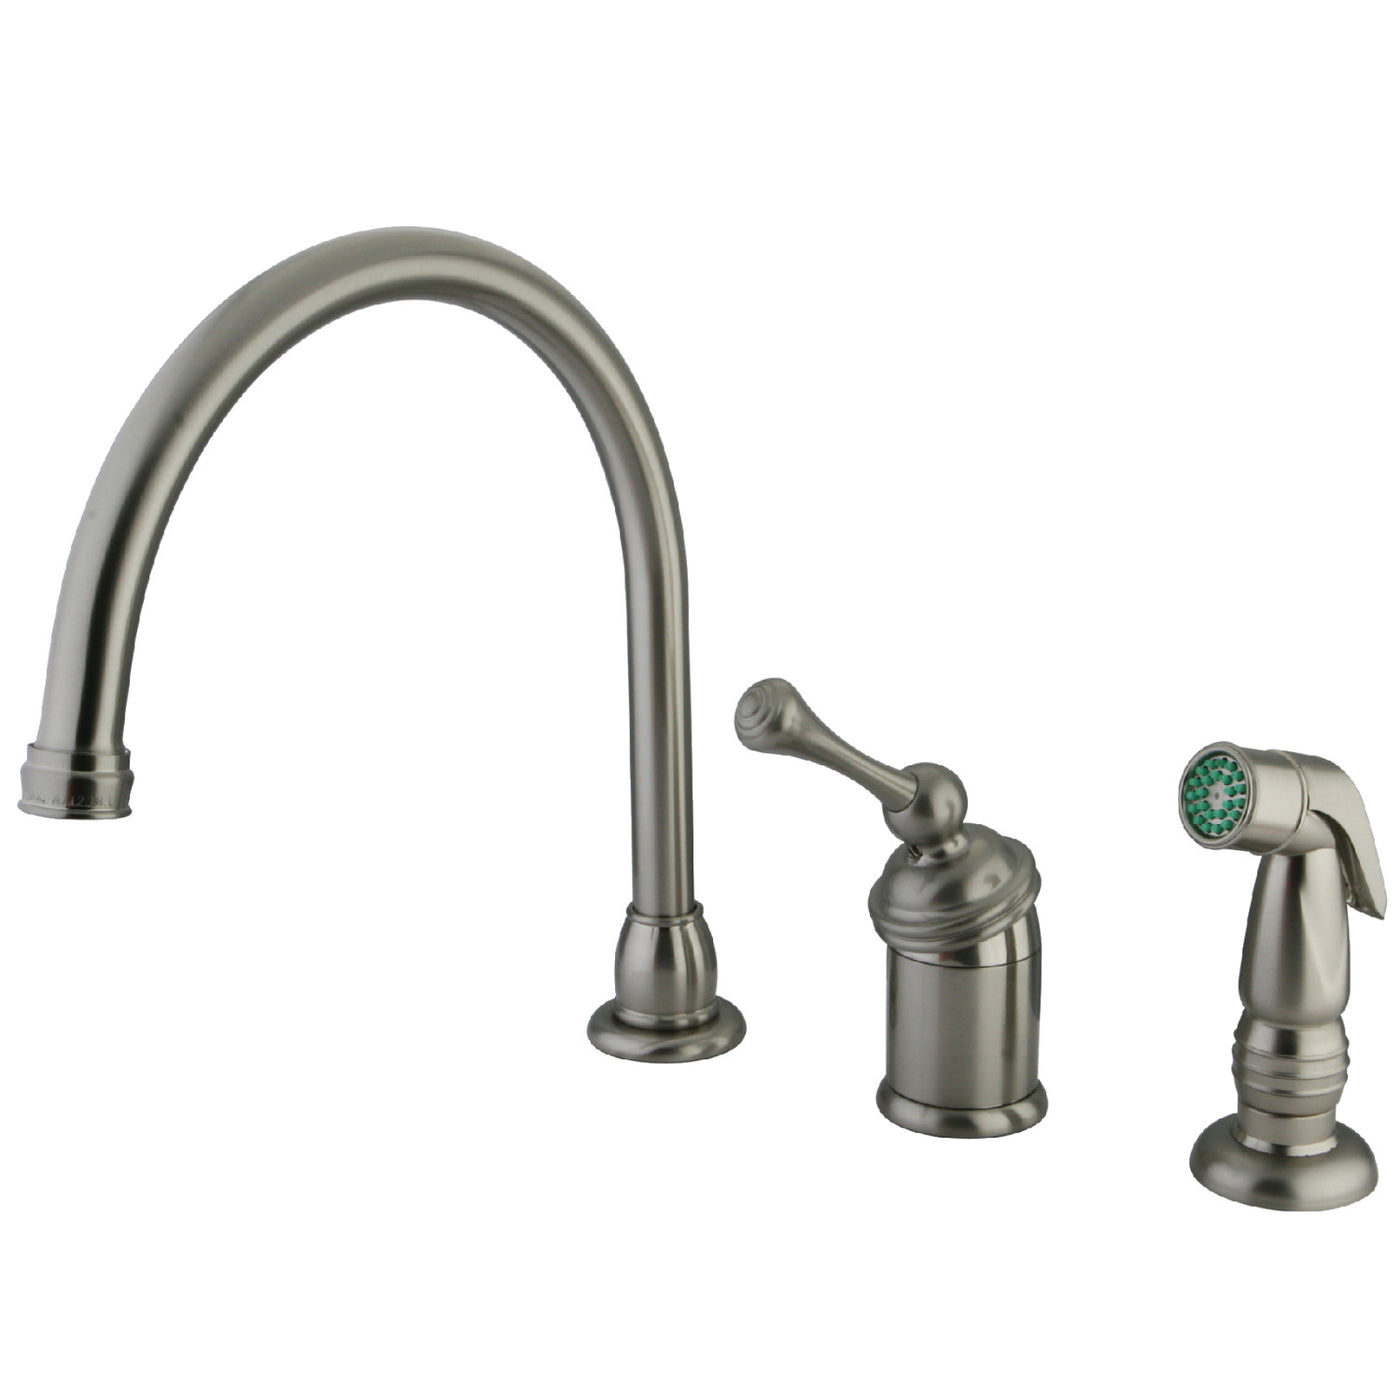 Elements of Design EB3818BLSP Single-Handle Widespread Kitchen Faucet with Plastic Sprayer, Brushed Nickel